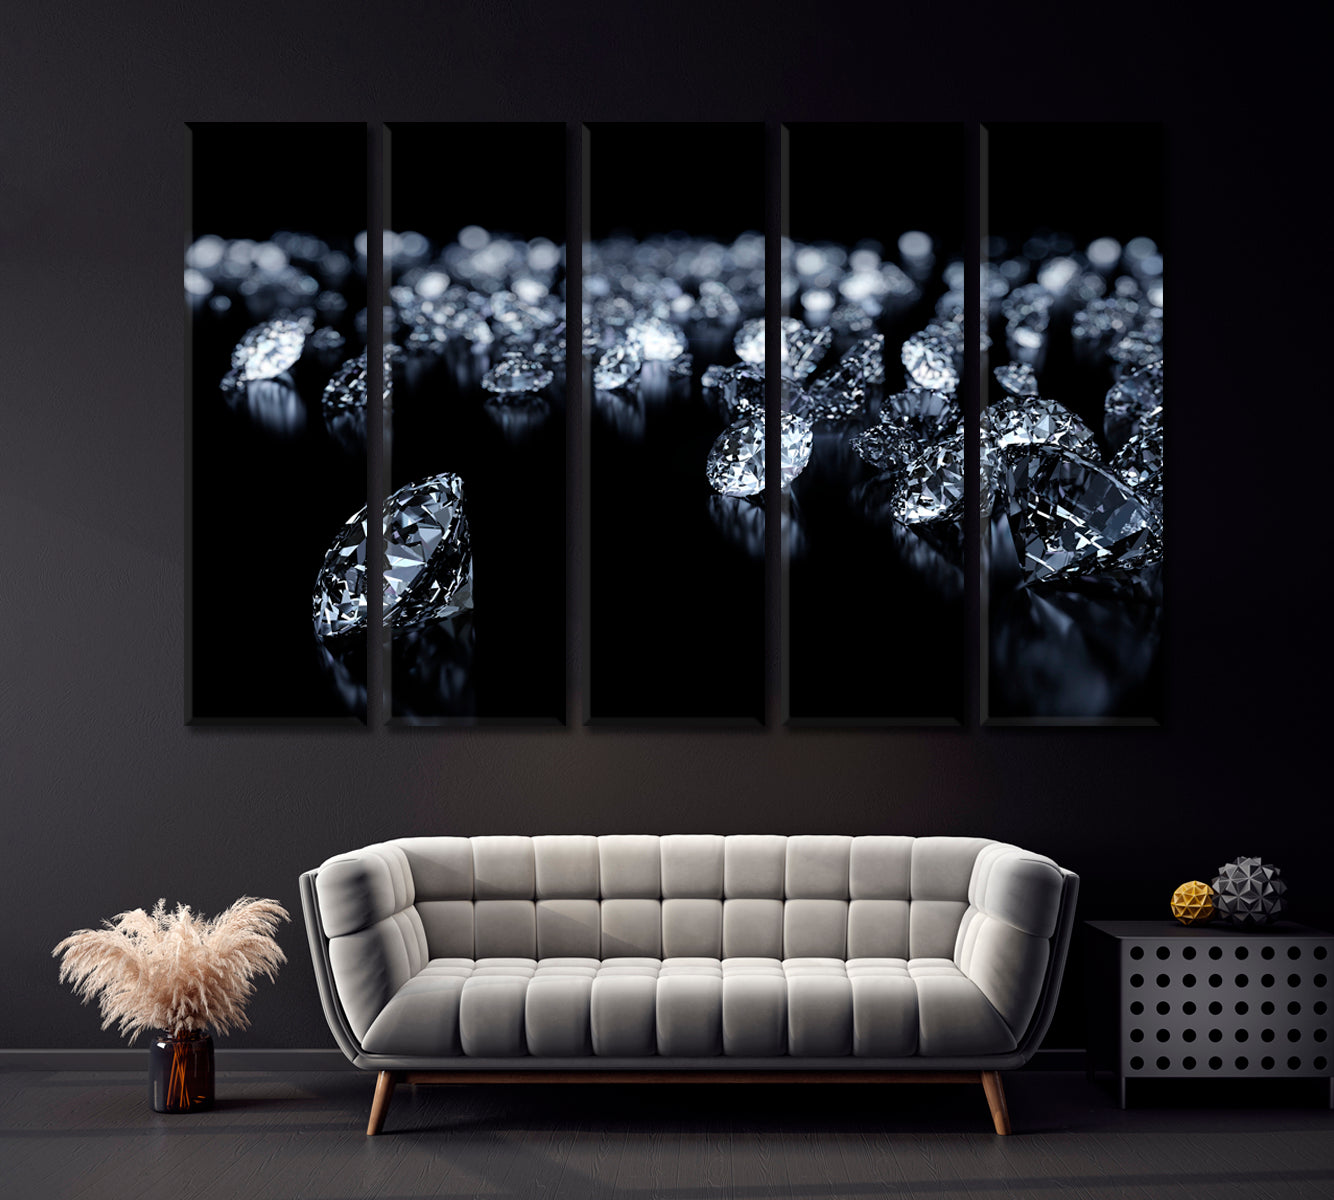 Diamonds in Black and White Canvas Print ArtLexy 5 Panels 36"x24" inches 